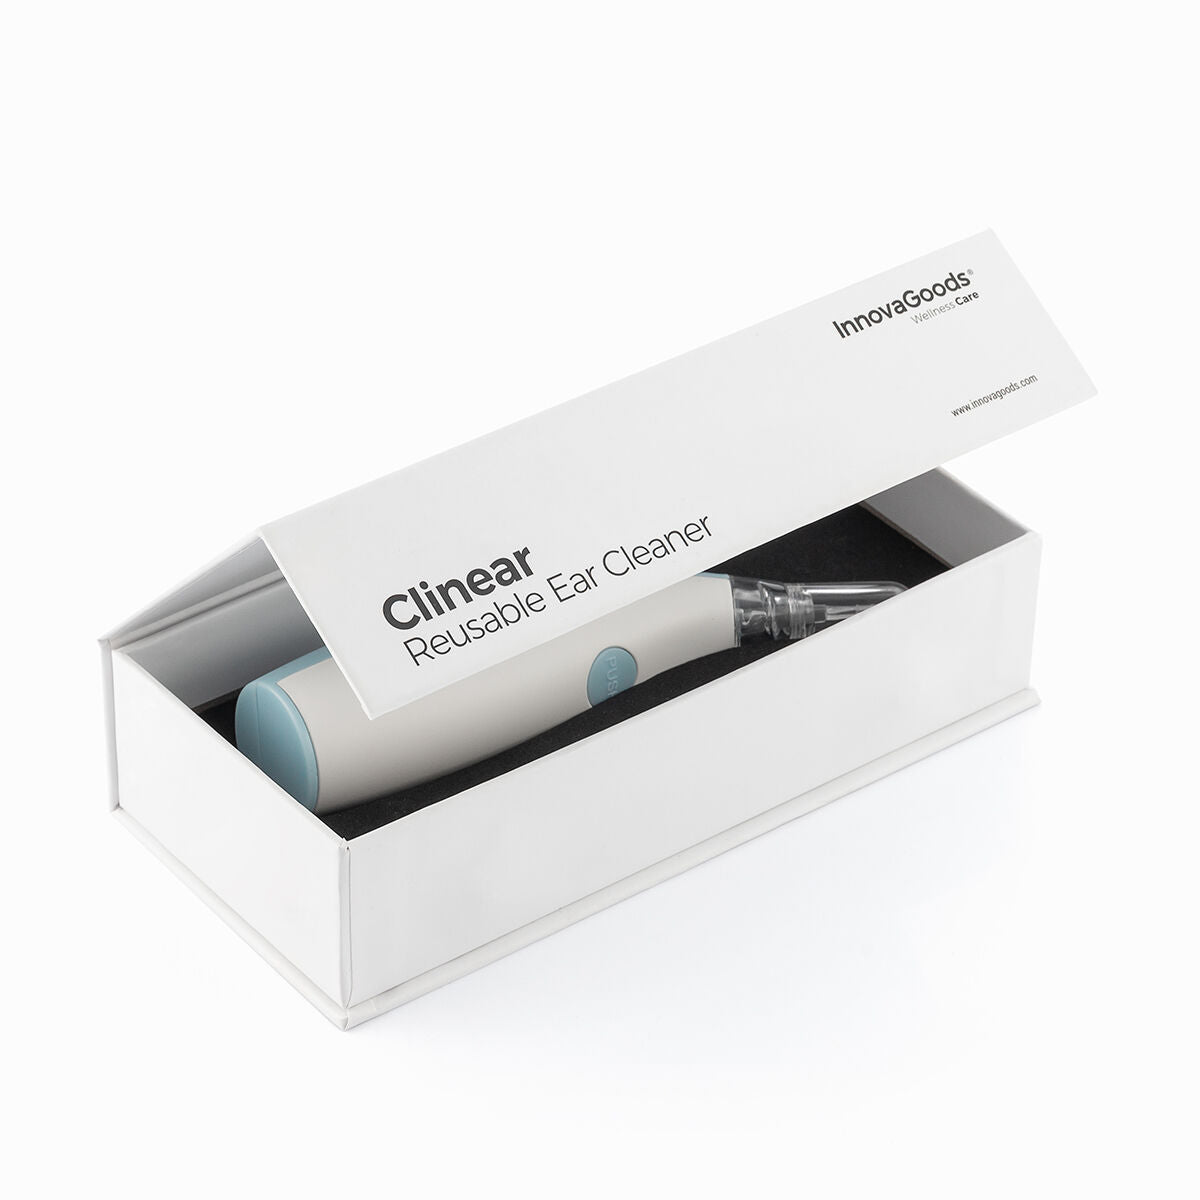 Reusable Electric Ear Cleaner Clinear InnovaGoods